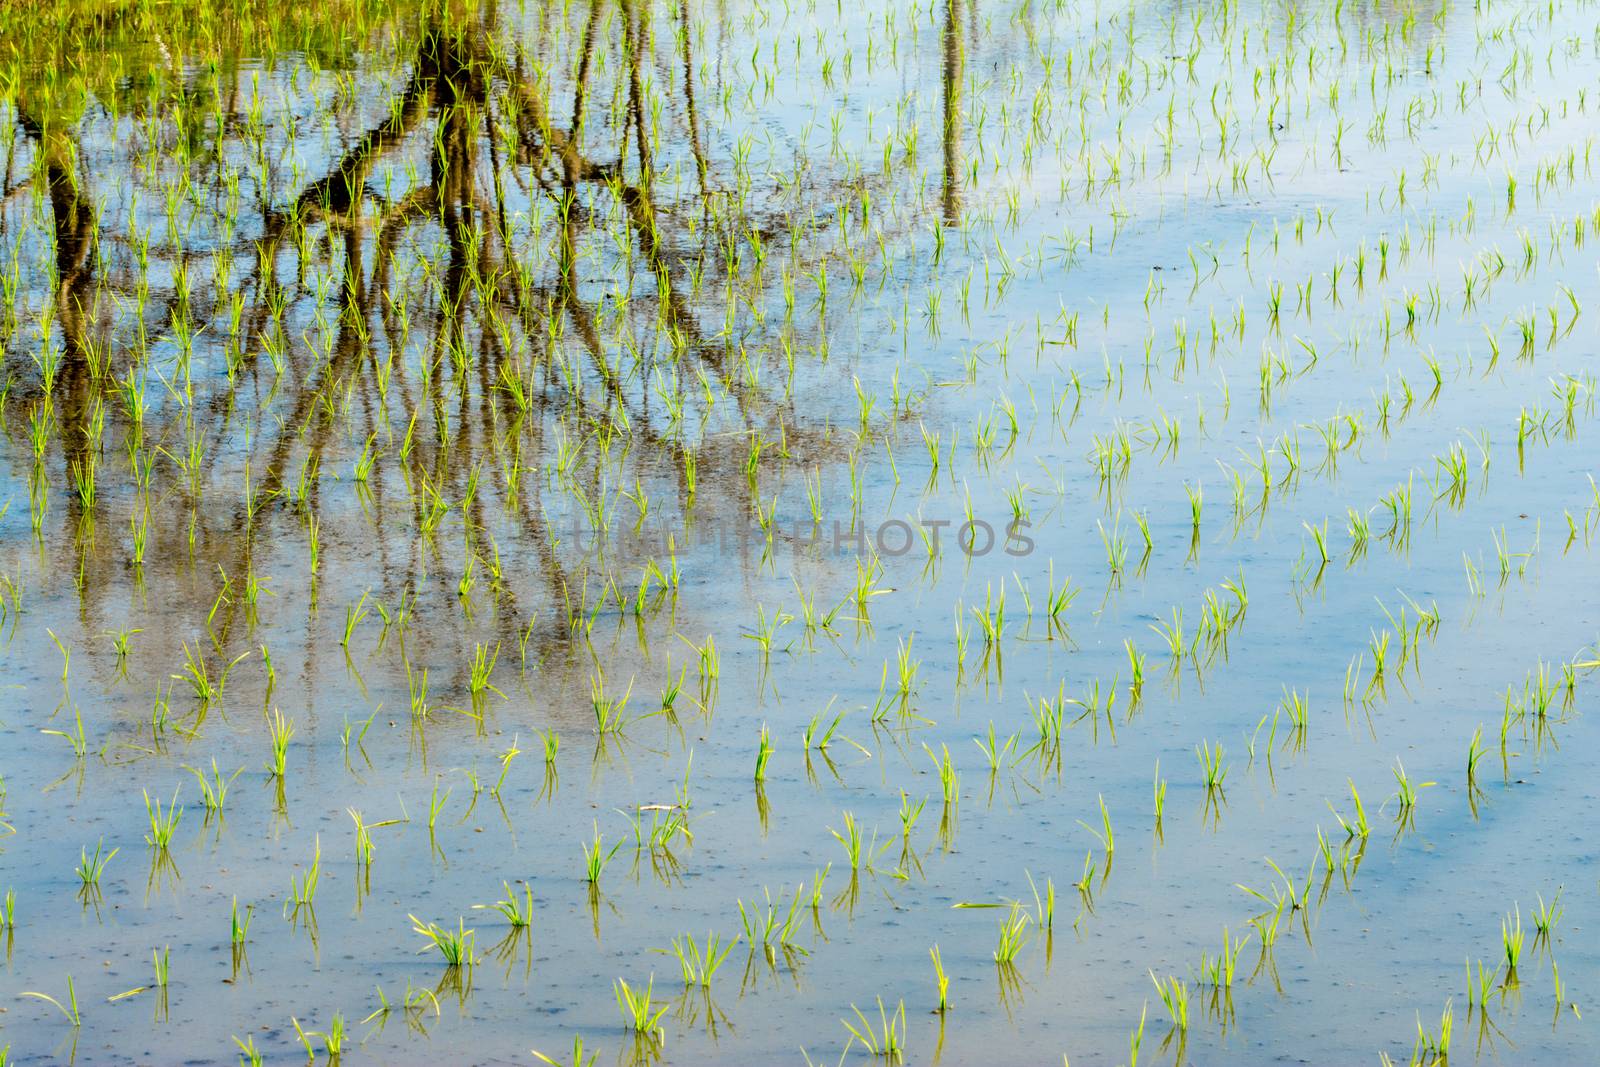 Trees Reflected in Rice Field by justtscott